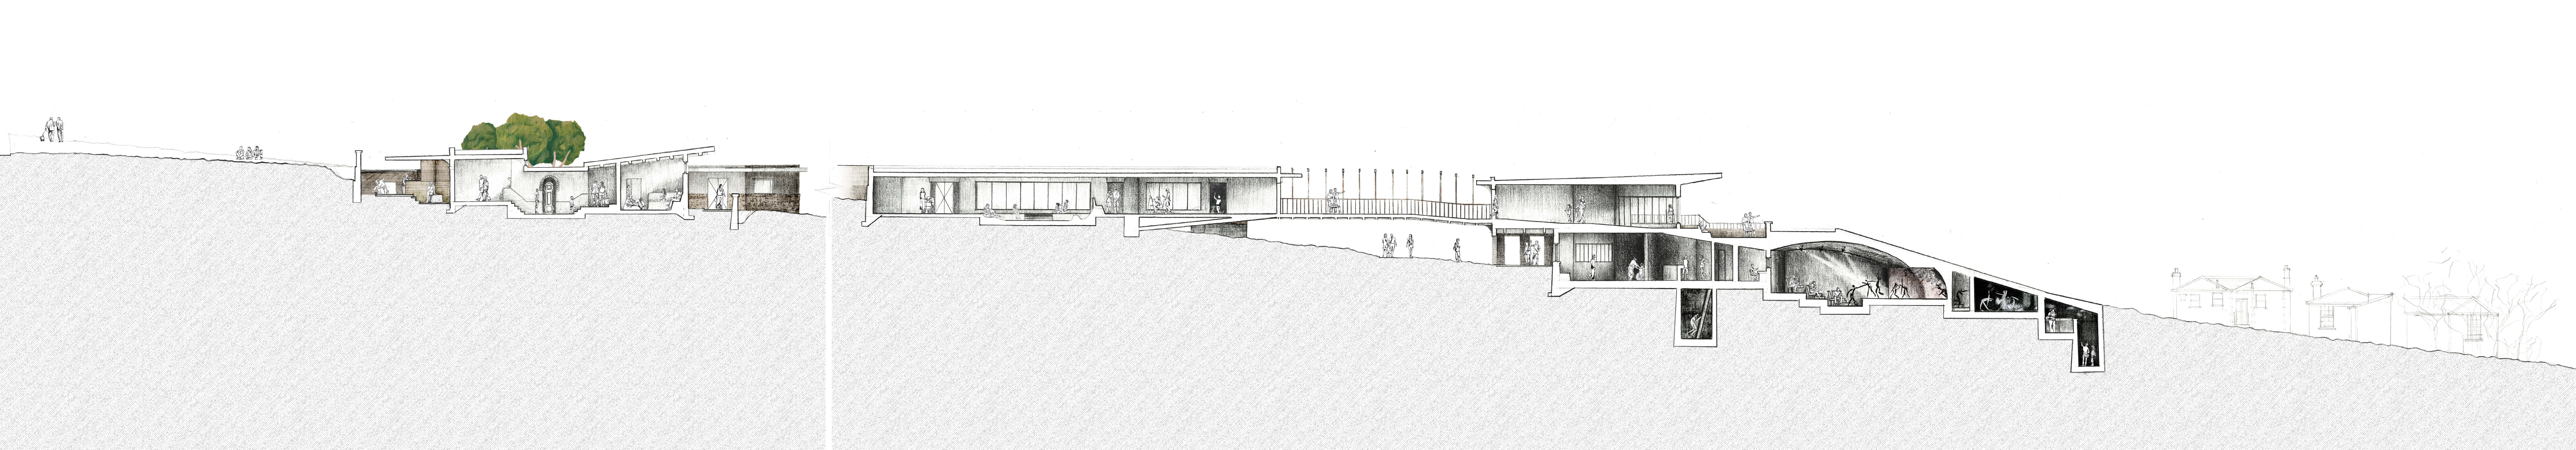 Section drawing through the dementia facility and theatre.